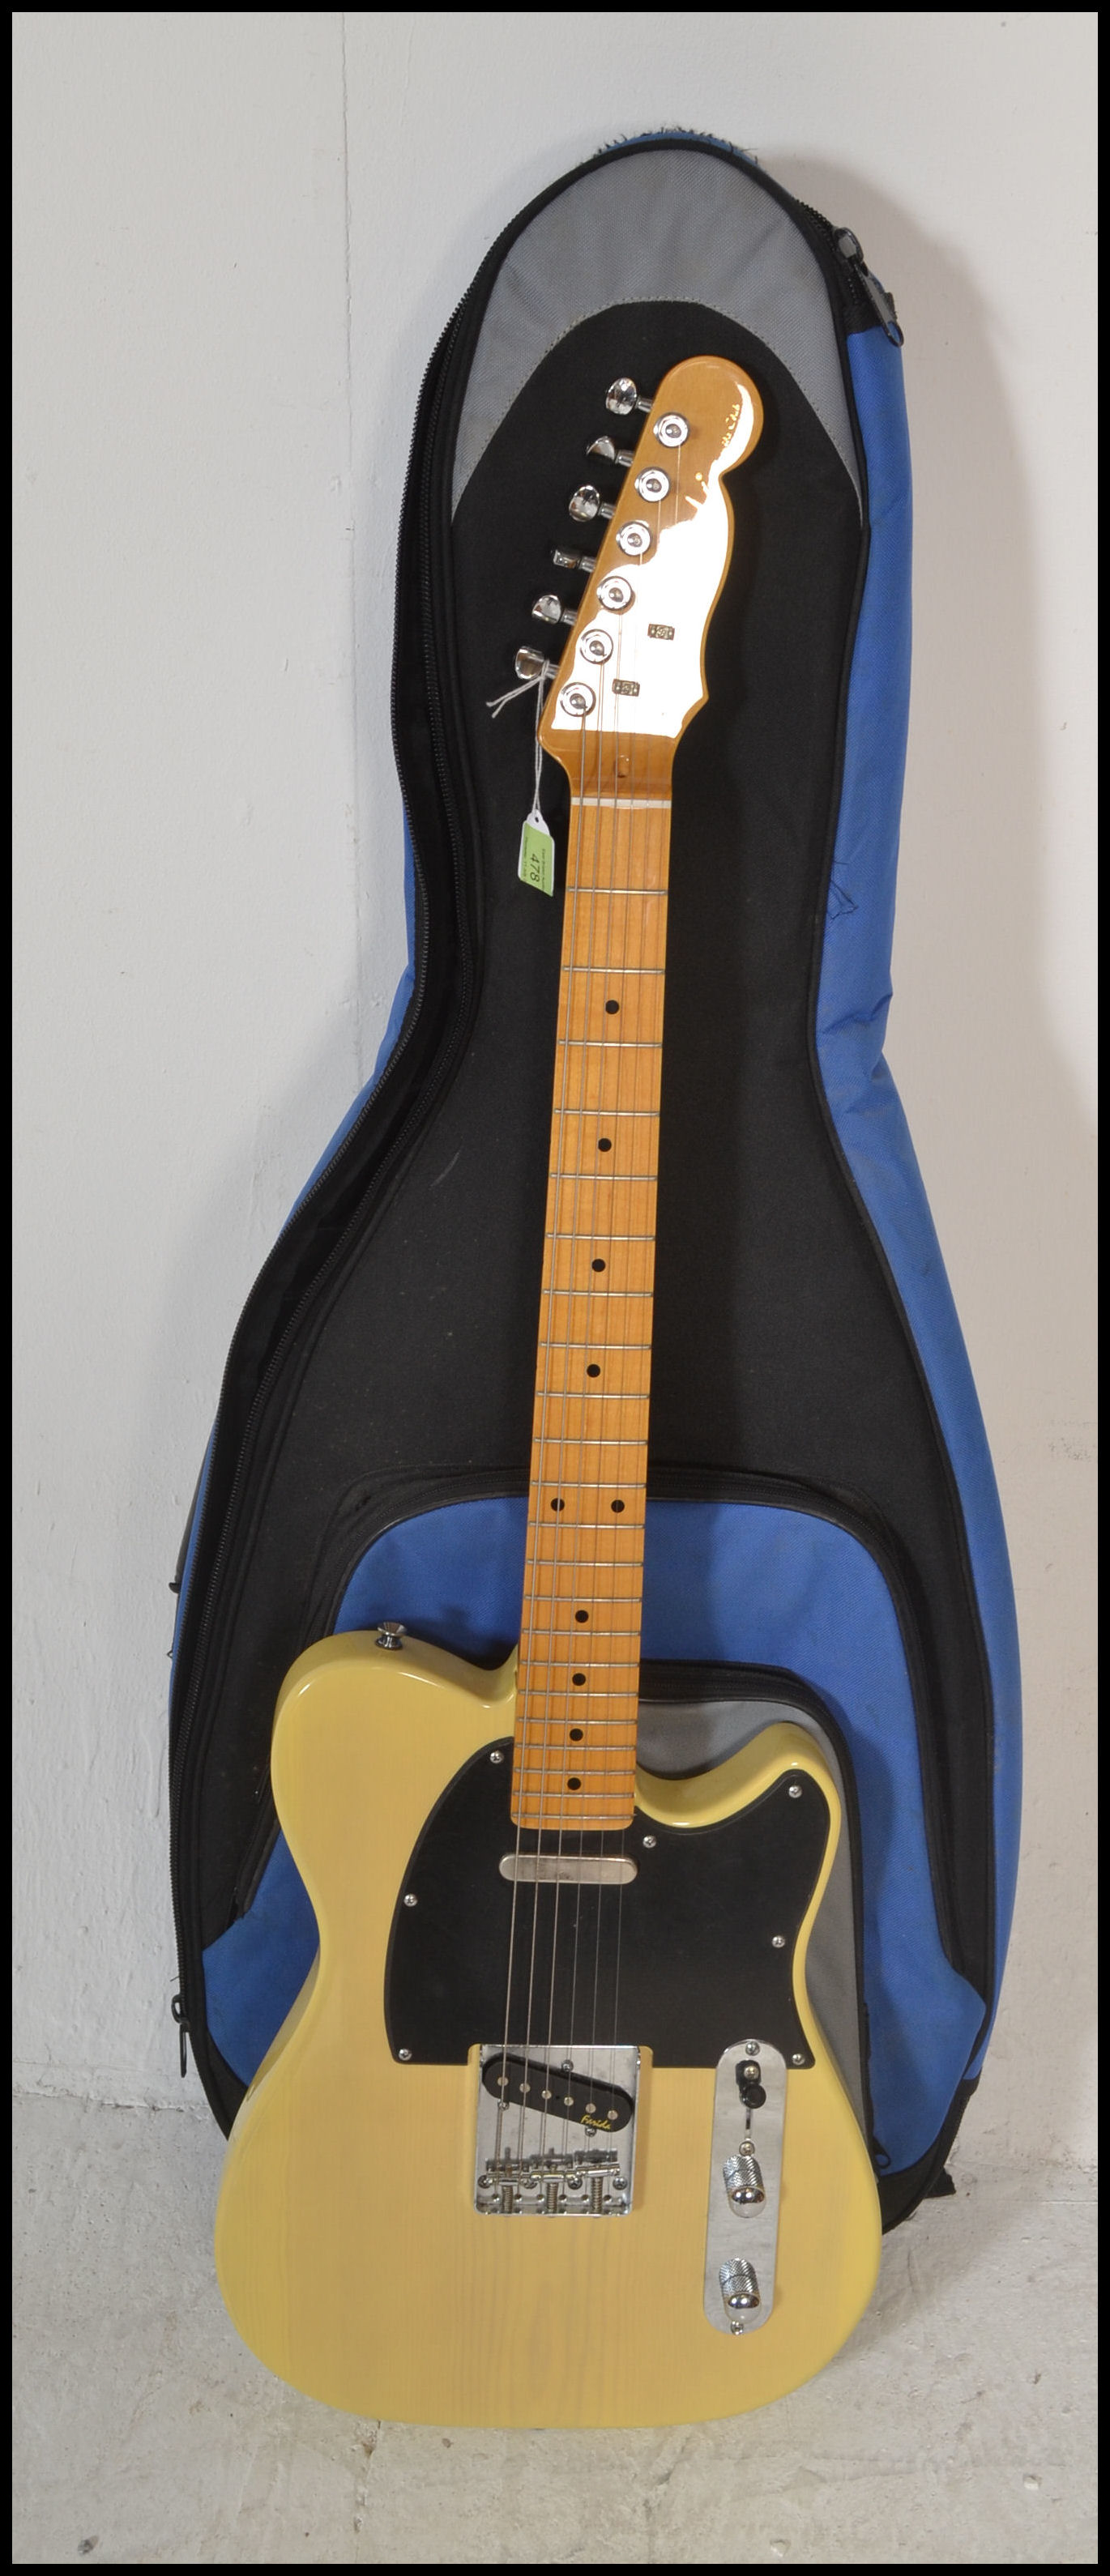 A six string electric guitar Telecaster style by Forida having maple neck and chrome tuning pegs - Image 5 of 5